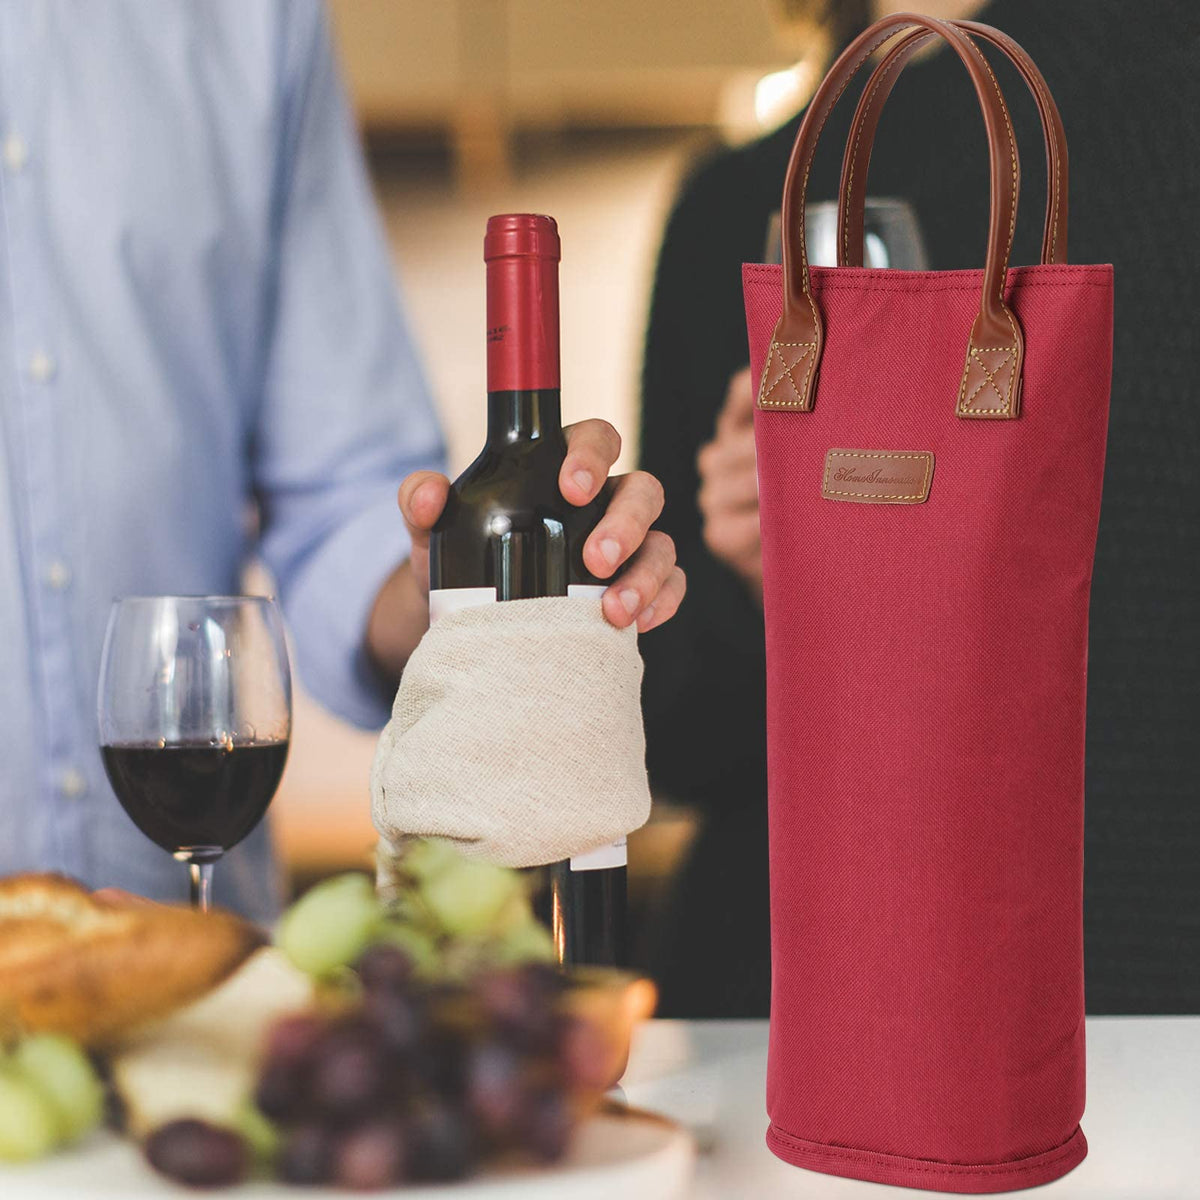 HAPPYPICNIC 4 Pack - Single Bottle Insulated Wine Tote